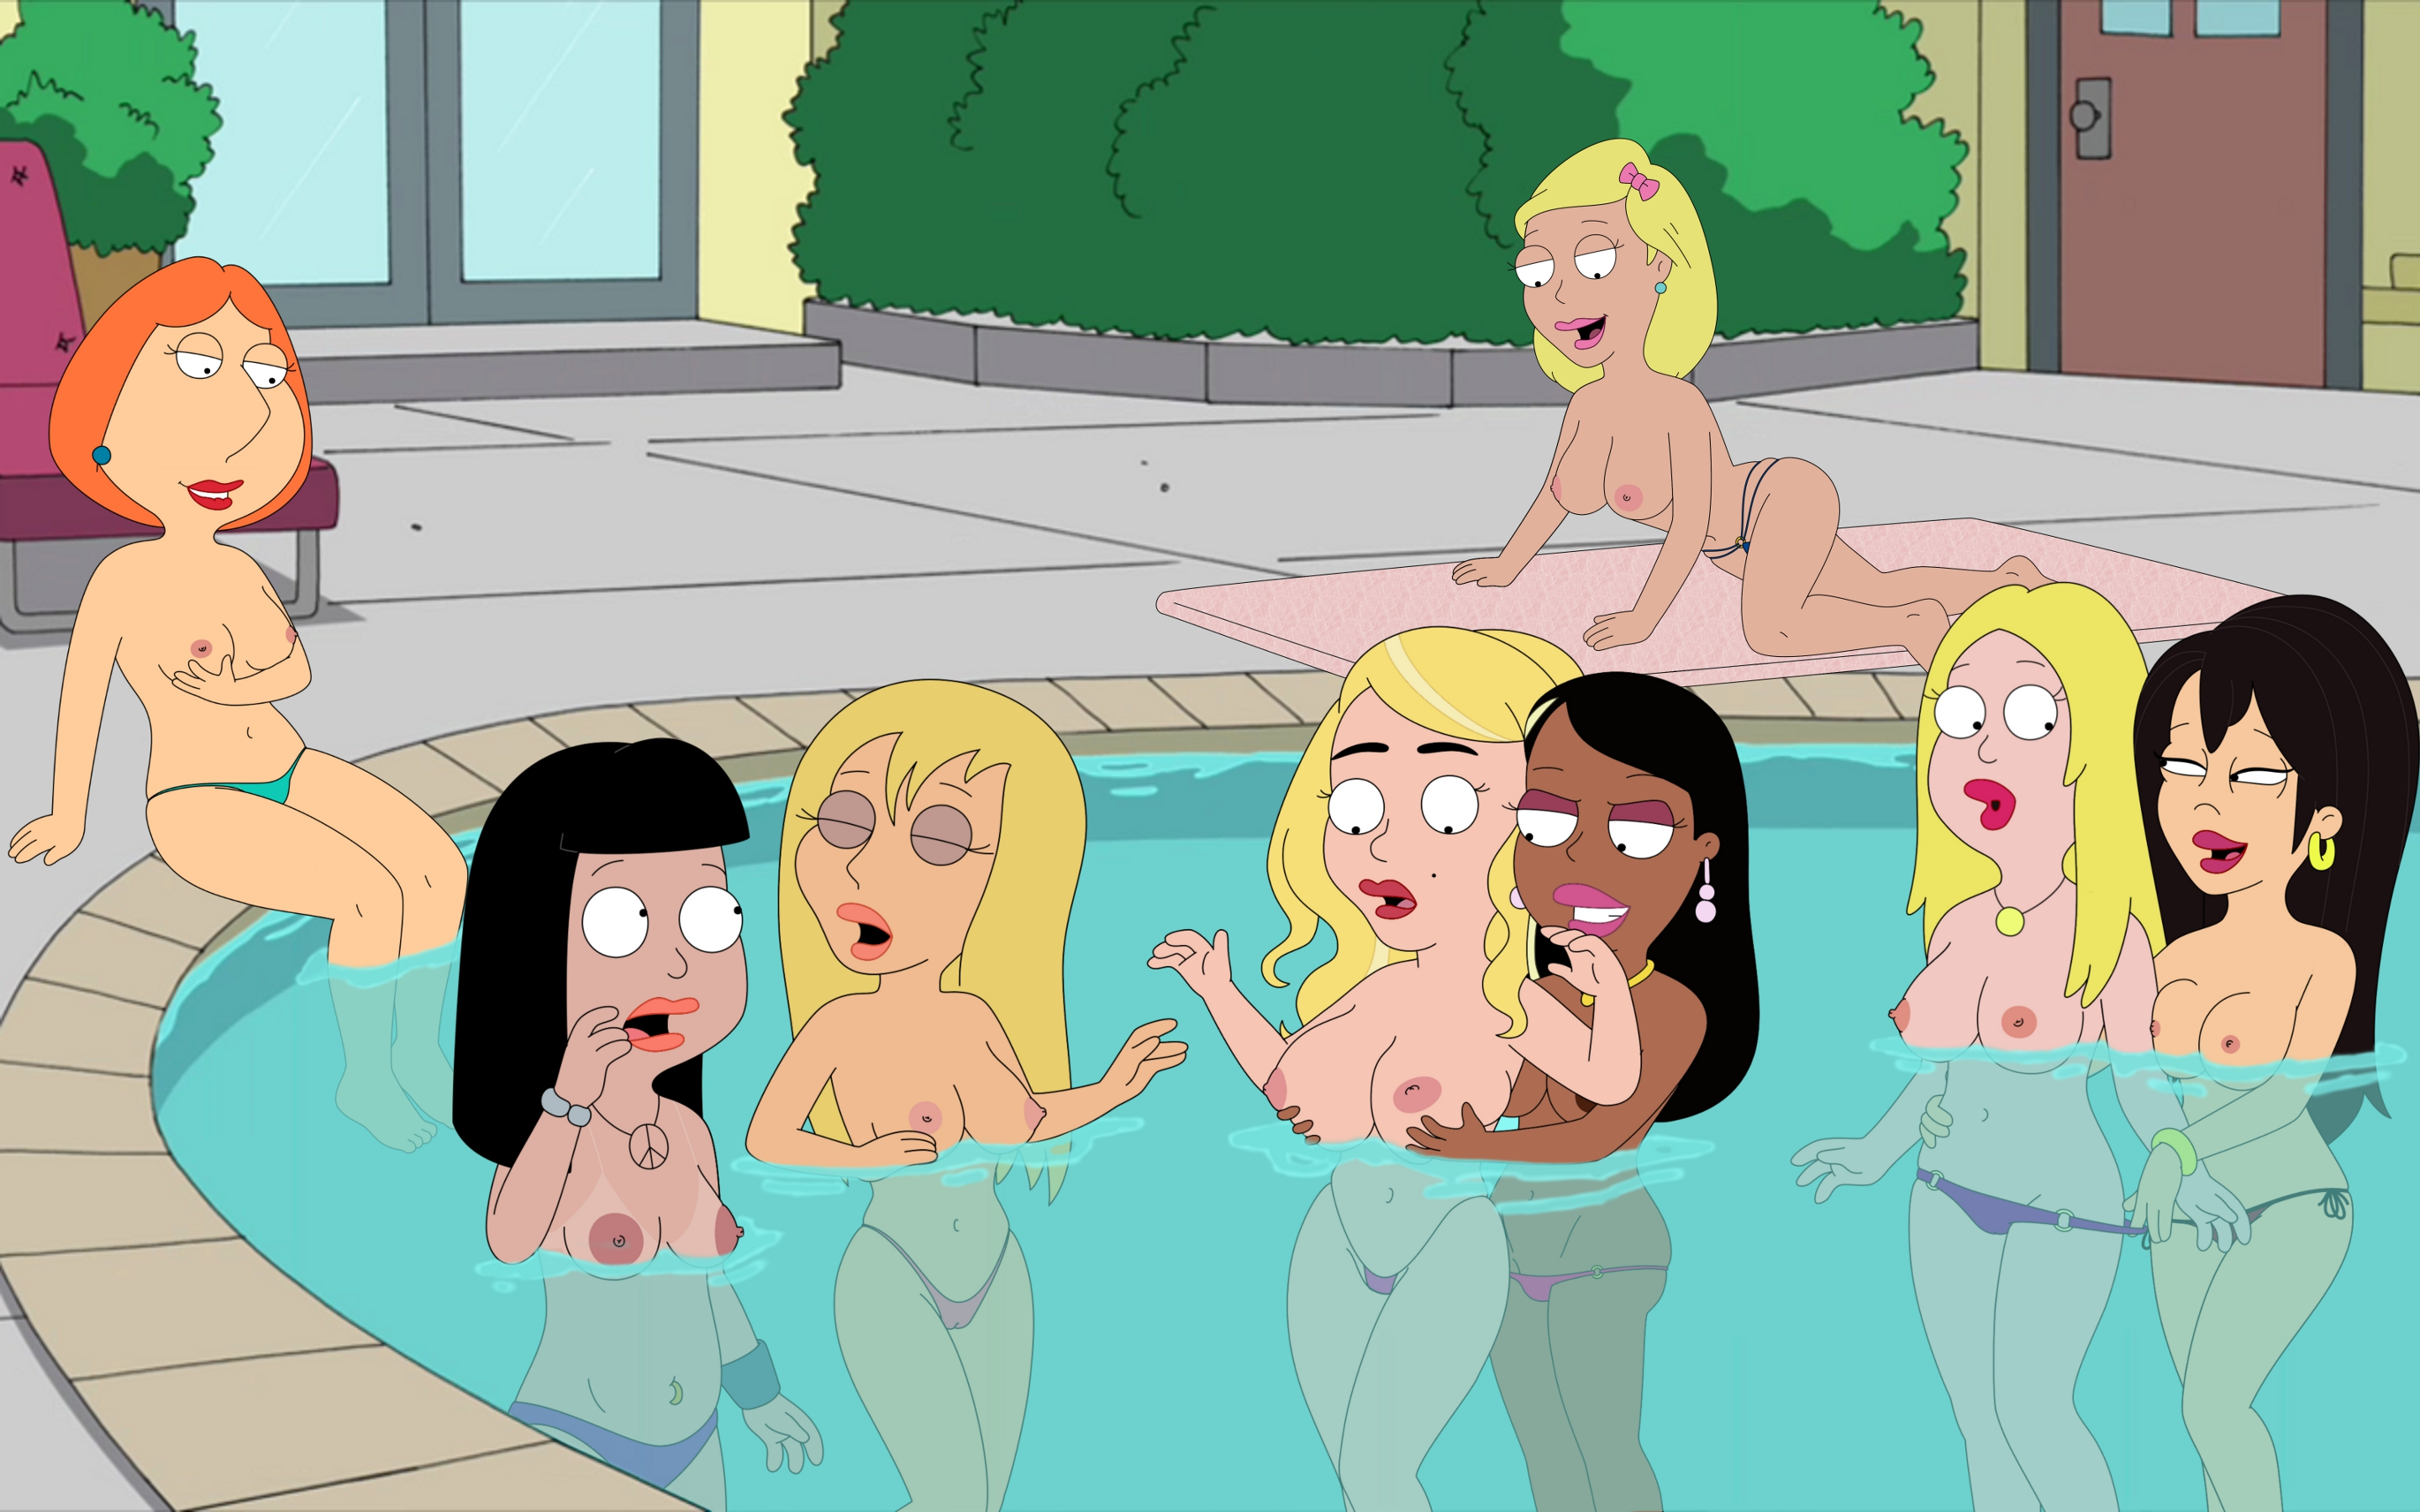 American Dad Porn Cleveland Show Girls - Post 2958458: American_Dad Becky_Arangino Big_Boob_June Family_Guy  Francine_Smith frost969 Gwen_Ling Hayley_Smith Jillian_Wilcox Lois_Griffin  Roberta_Tubbs The_Cleveland_Show